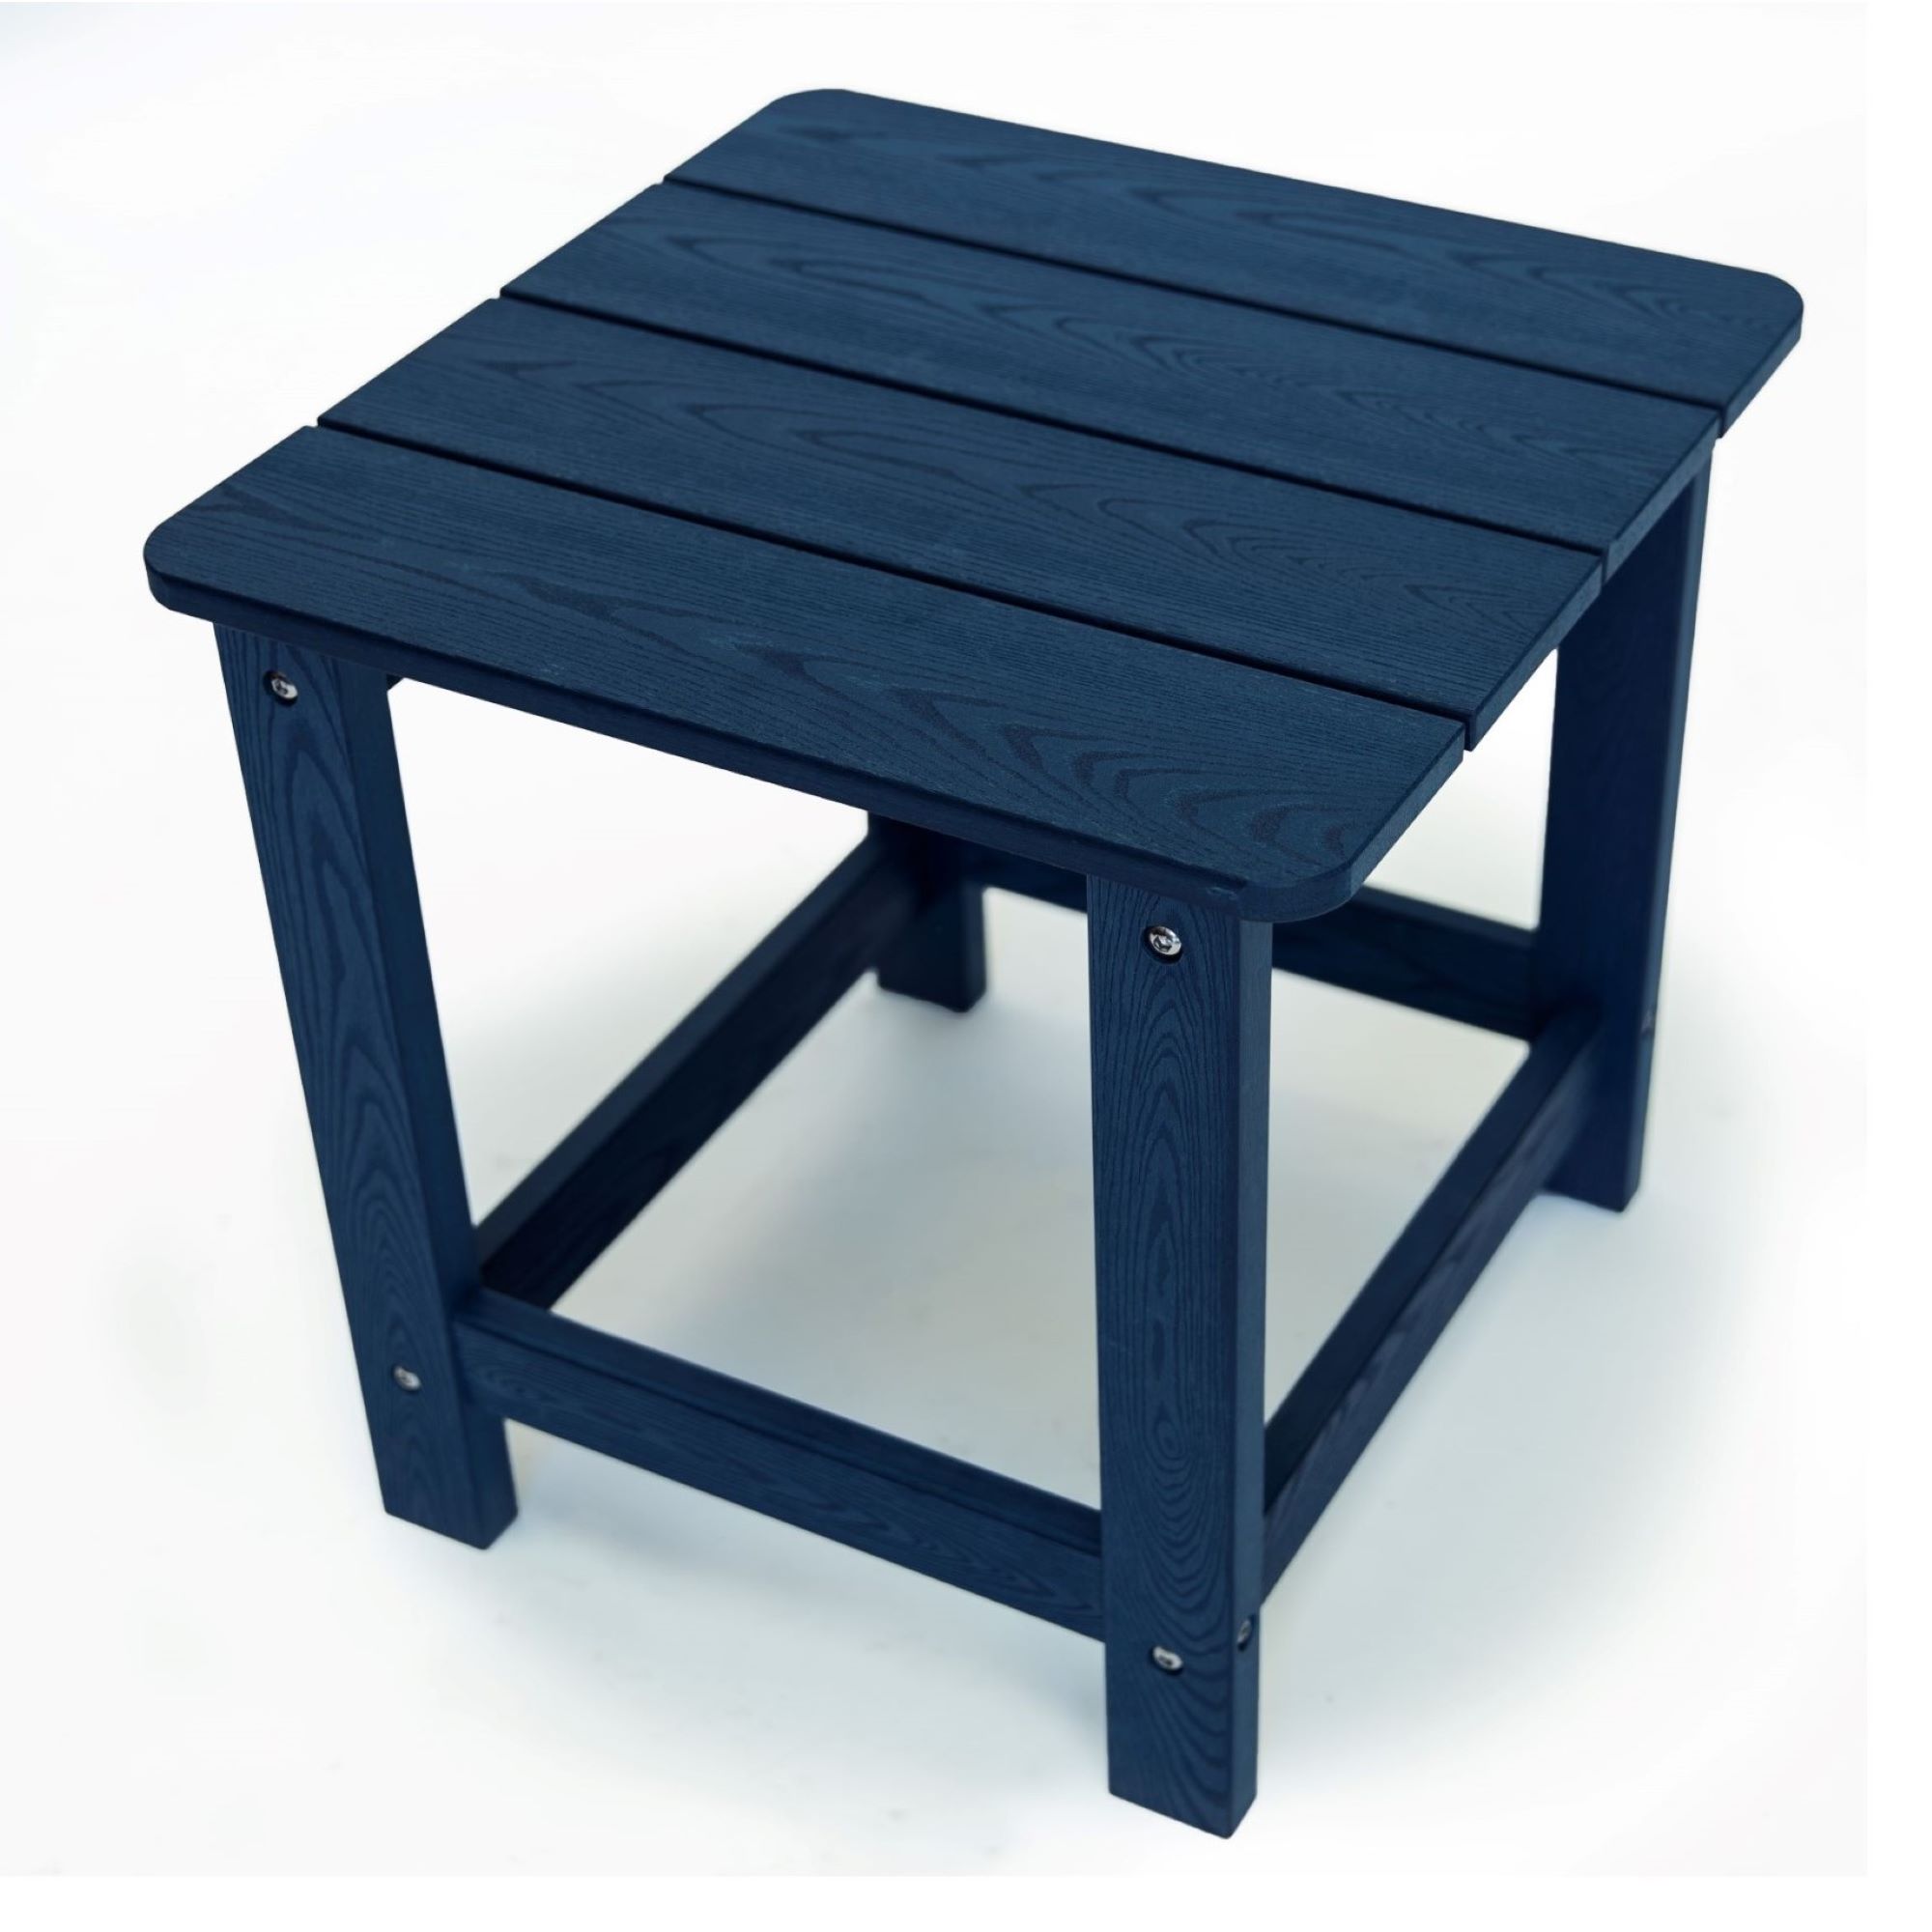 All Weather Indoor-Outdoor Side Table, Navy - image 1 of 7